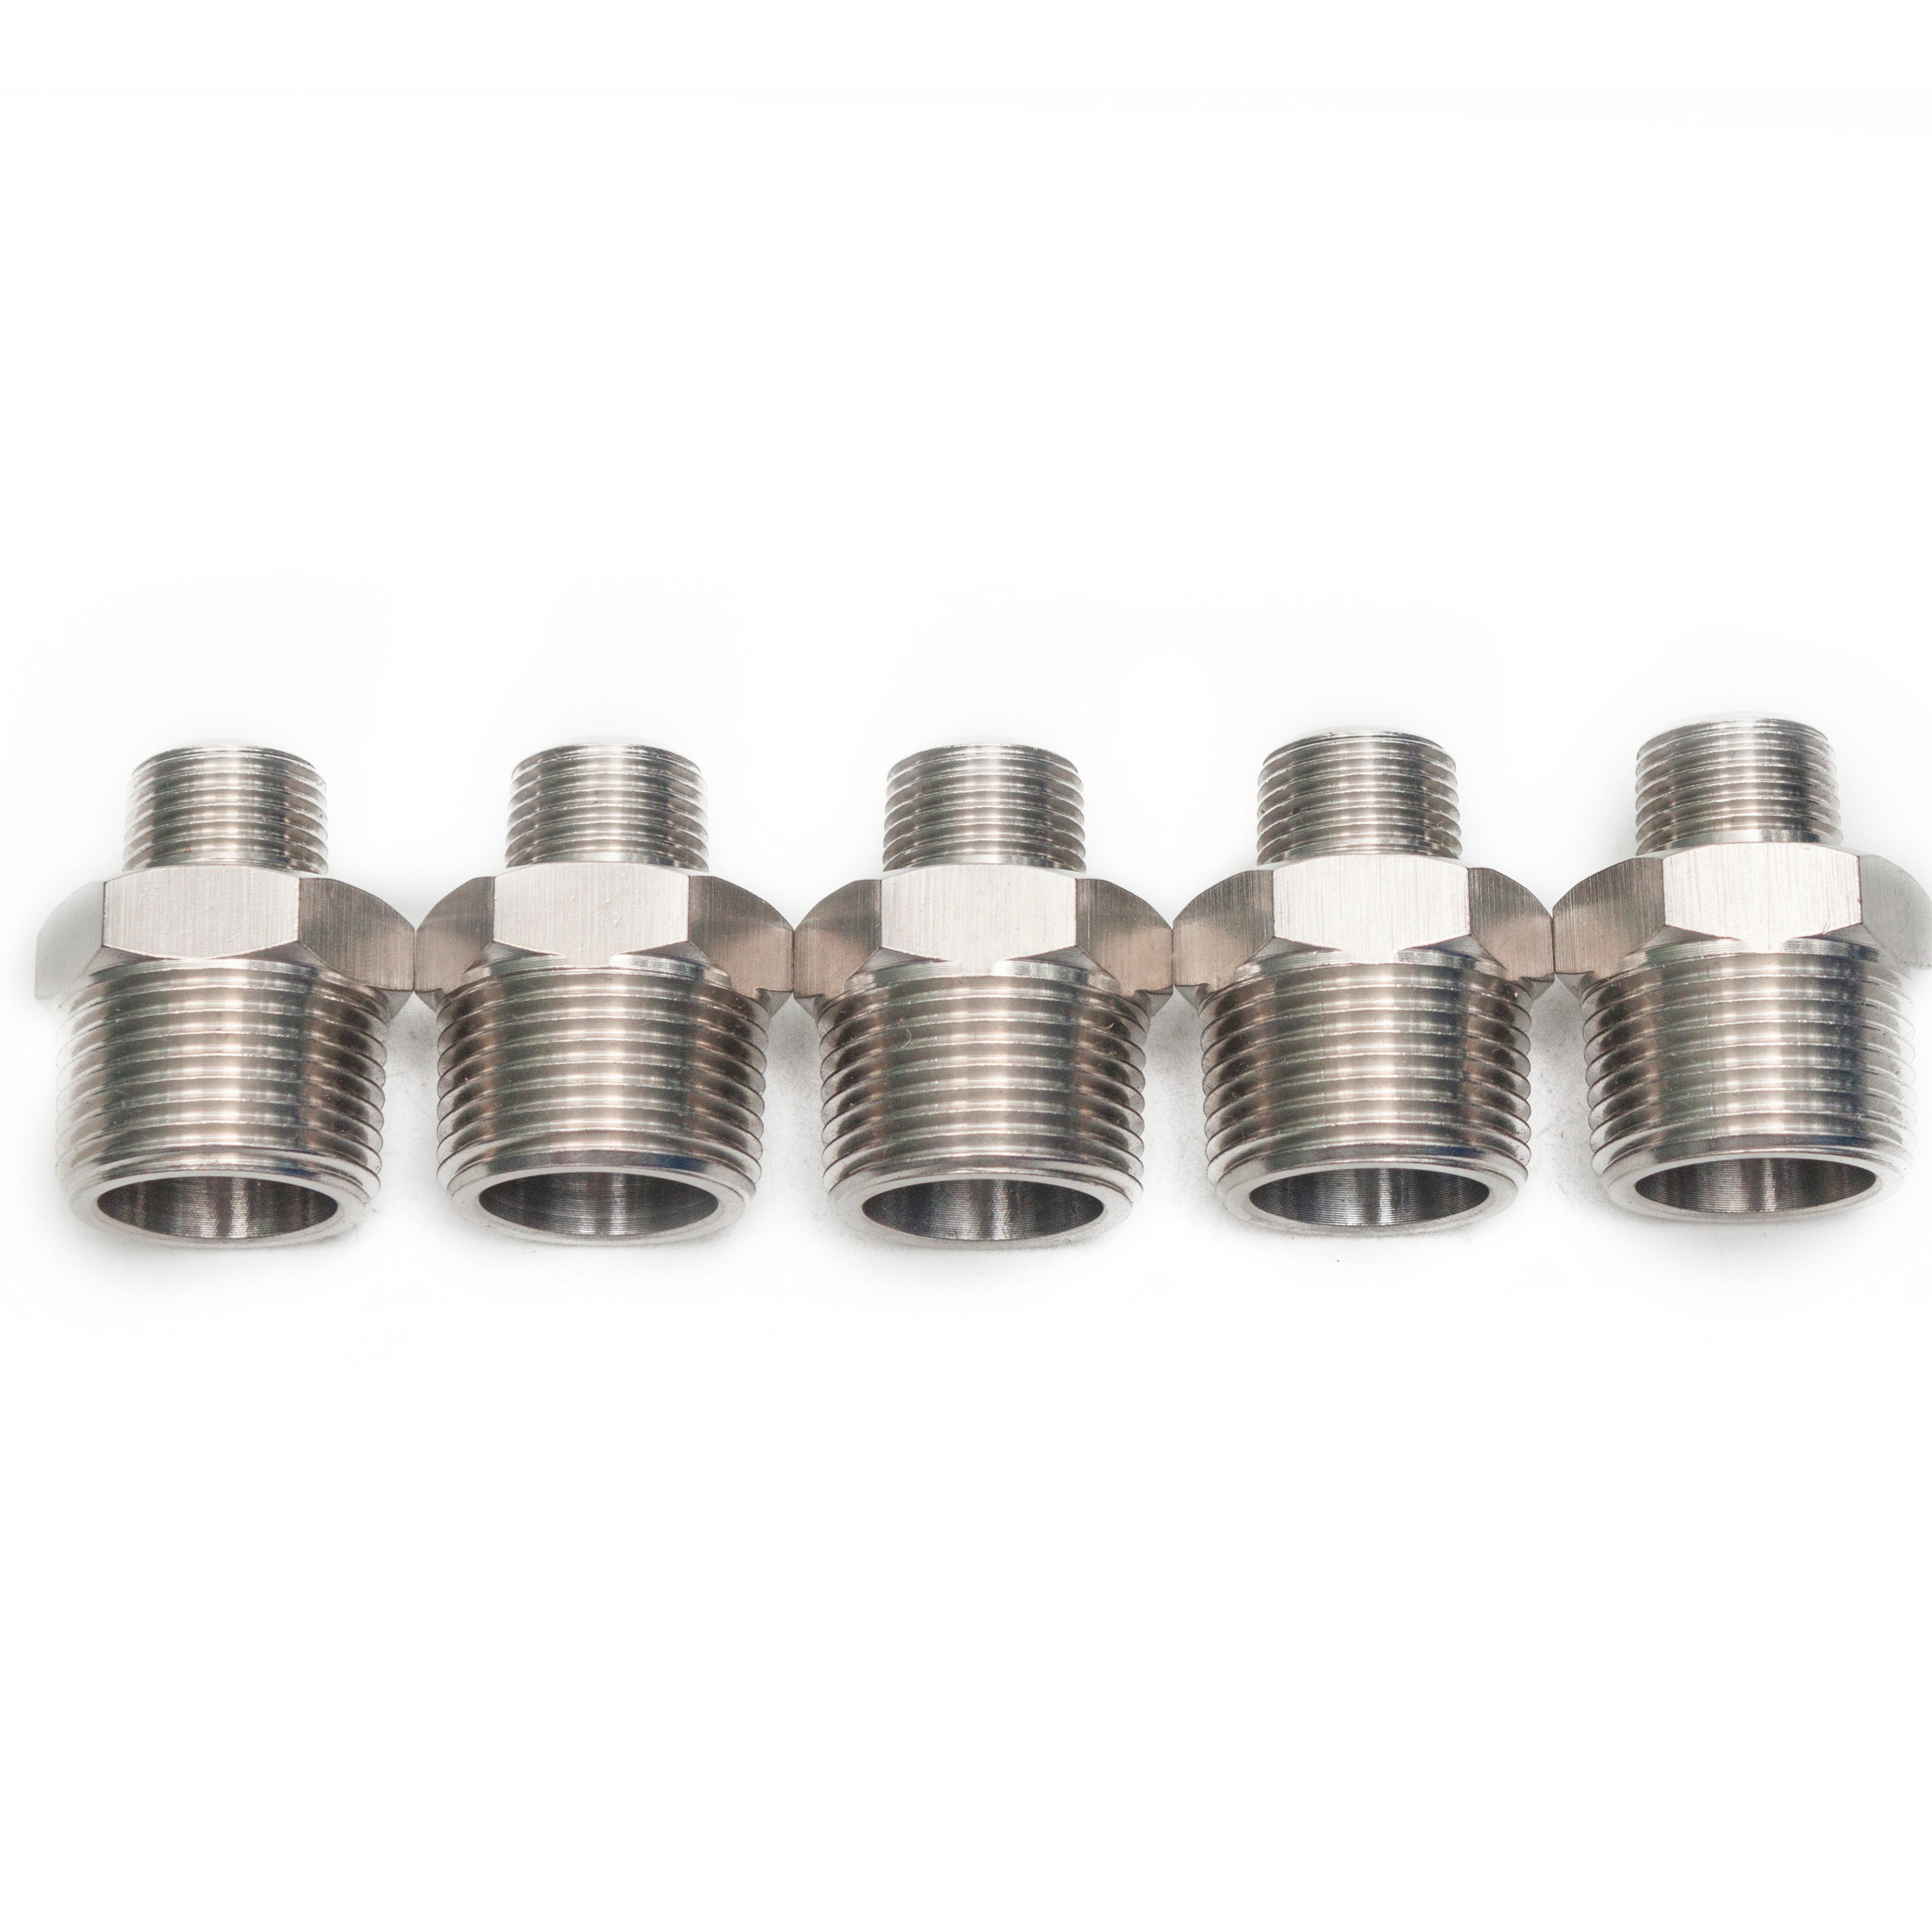 LTWFITTING Bar Production Stainless Steel 316 Pipe Hex Reducing Nipple Fitting 3/4 Inch x 3/8 Inch Male NPT Water Boat (Pack of 5)